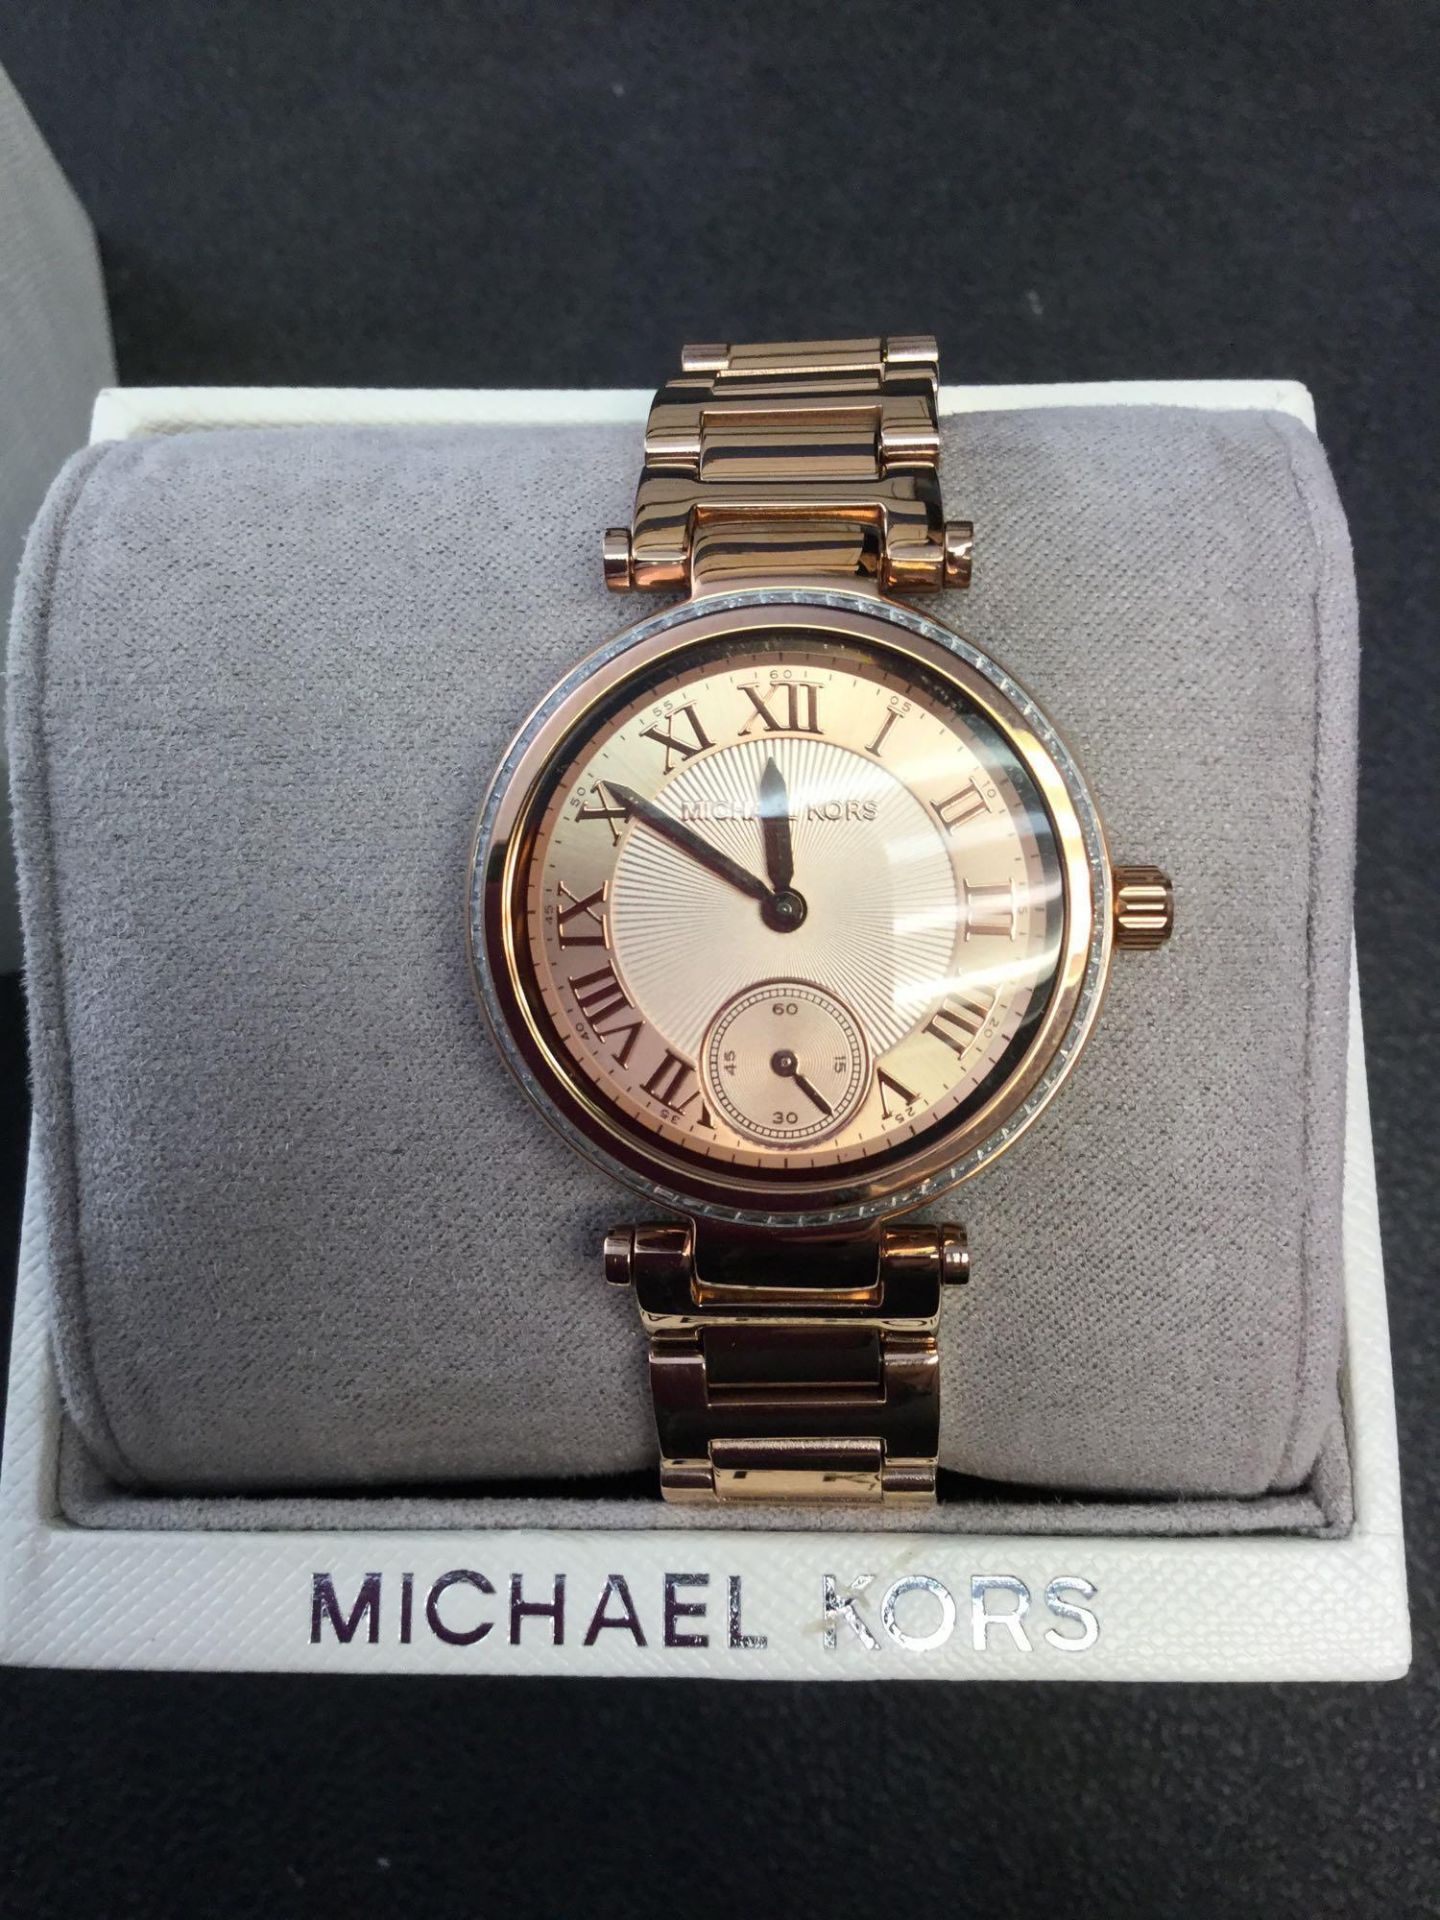 Michael Kors Woman's Watch - Crystals around Face- Coppertone Band - Image 2 of 2